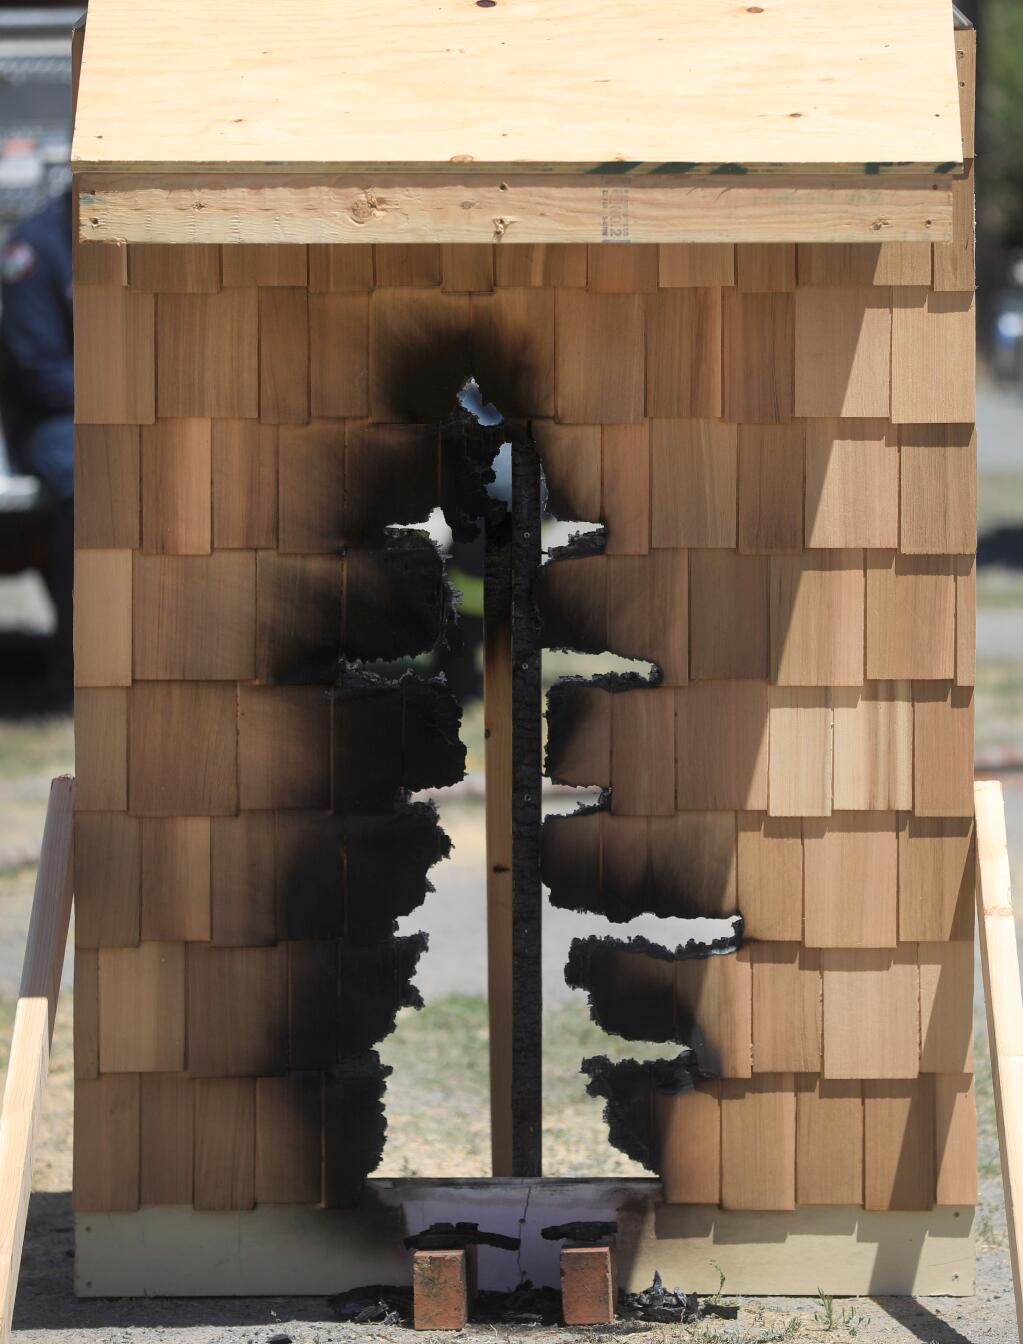 Panelized shingles were burned, Tuesday, June 18, 2019 at the Santa Rosa Junior College Public Safety Training Center in Windsor. (Kent Porter / The Press Democrat) 2019